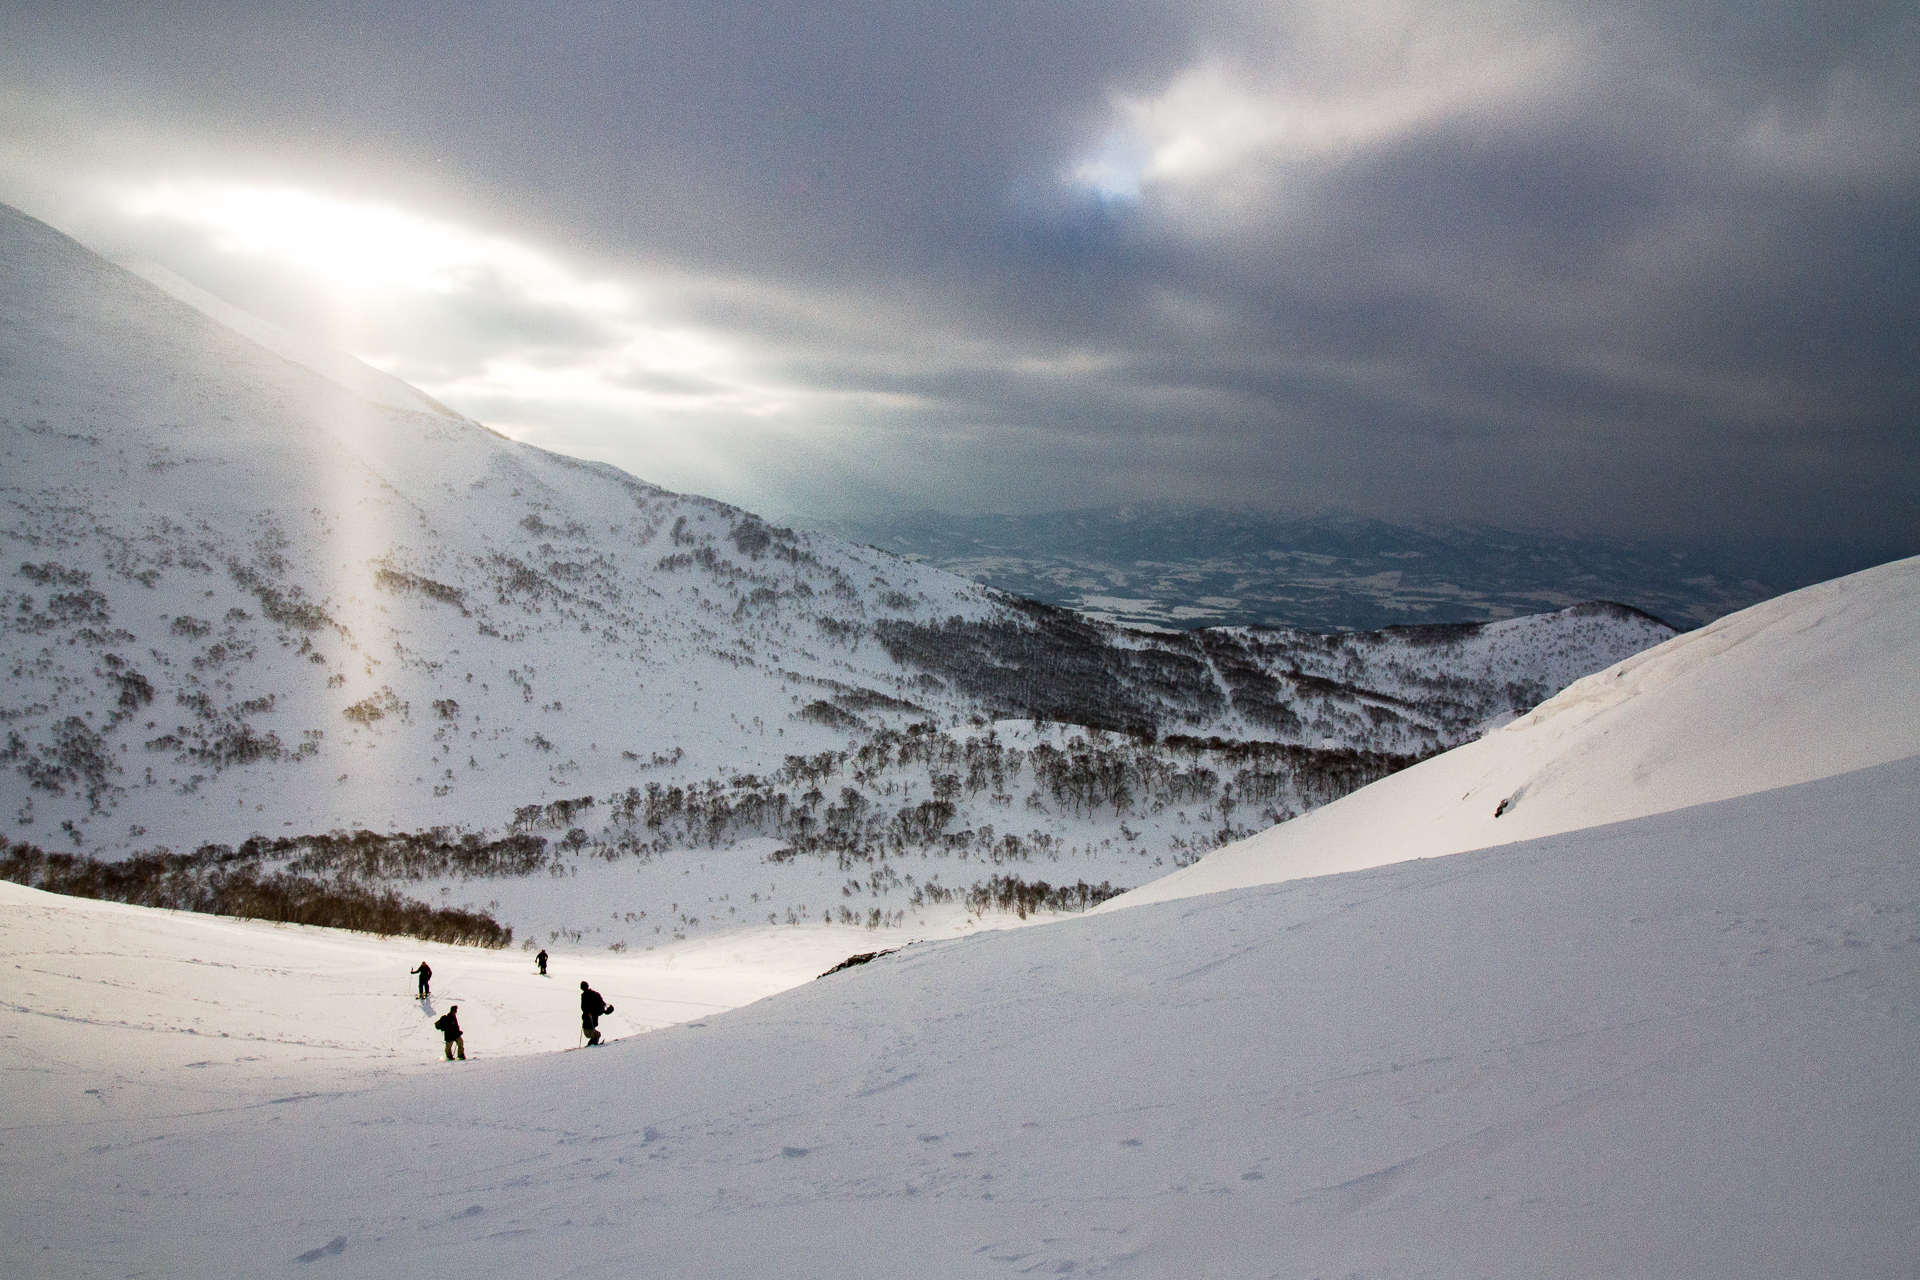 The sun peeks through the clouds in the Niseko backcountry.